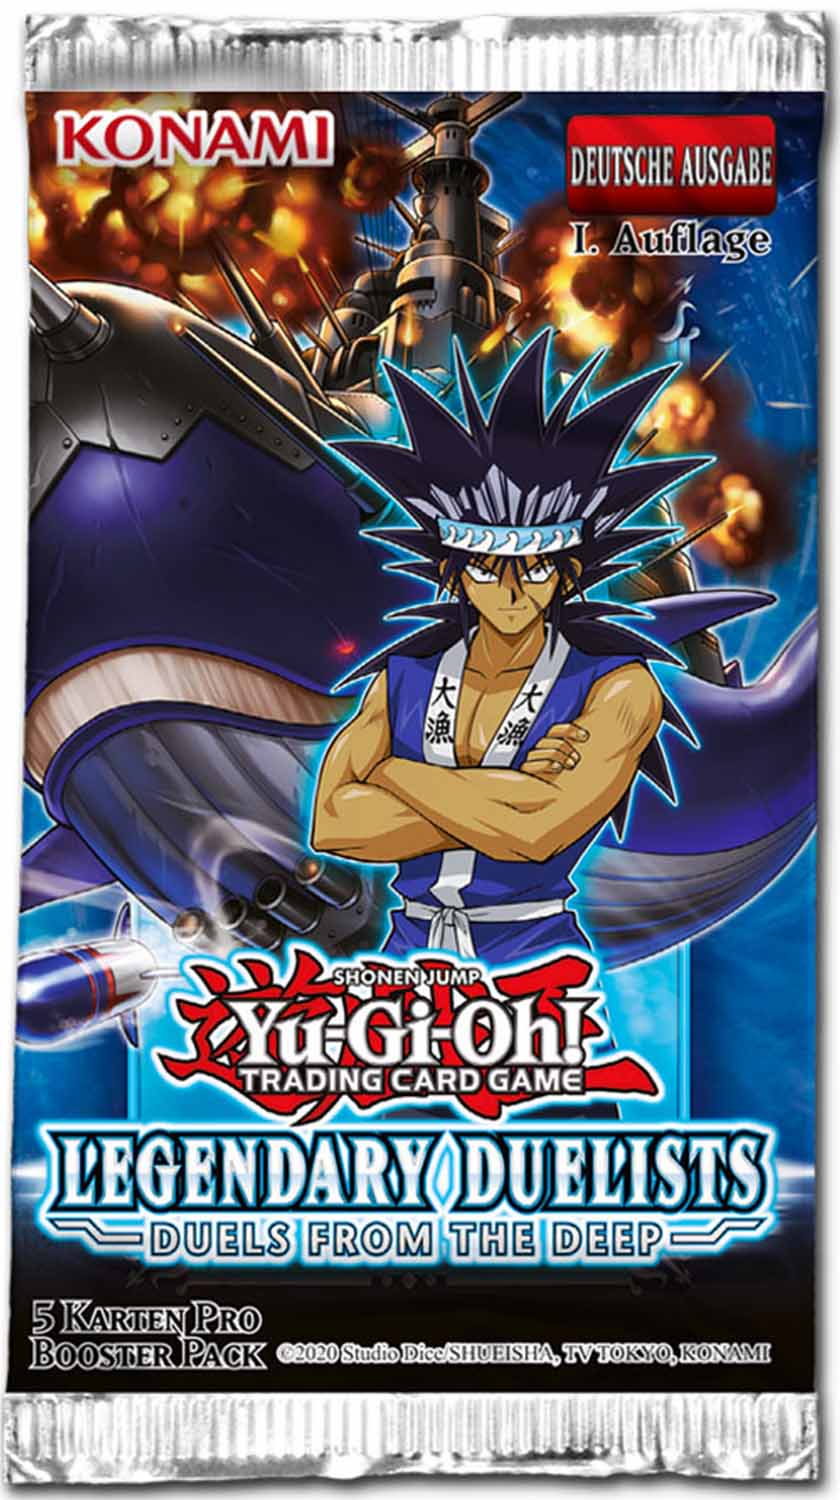 Legendary Duelists Duels from the Deep Booster - Yu-Gi-Oh! - DE